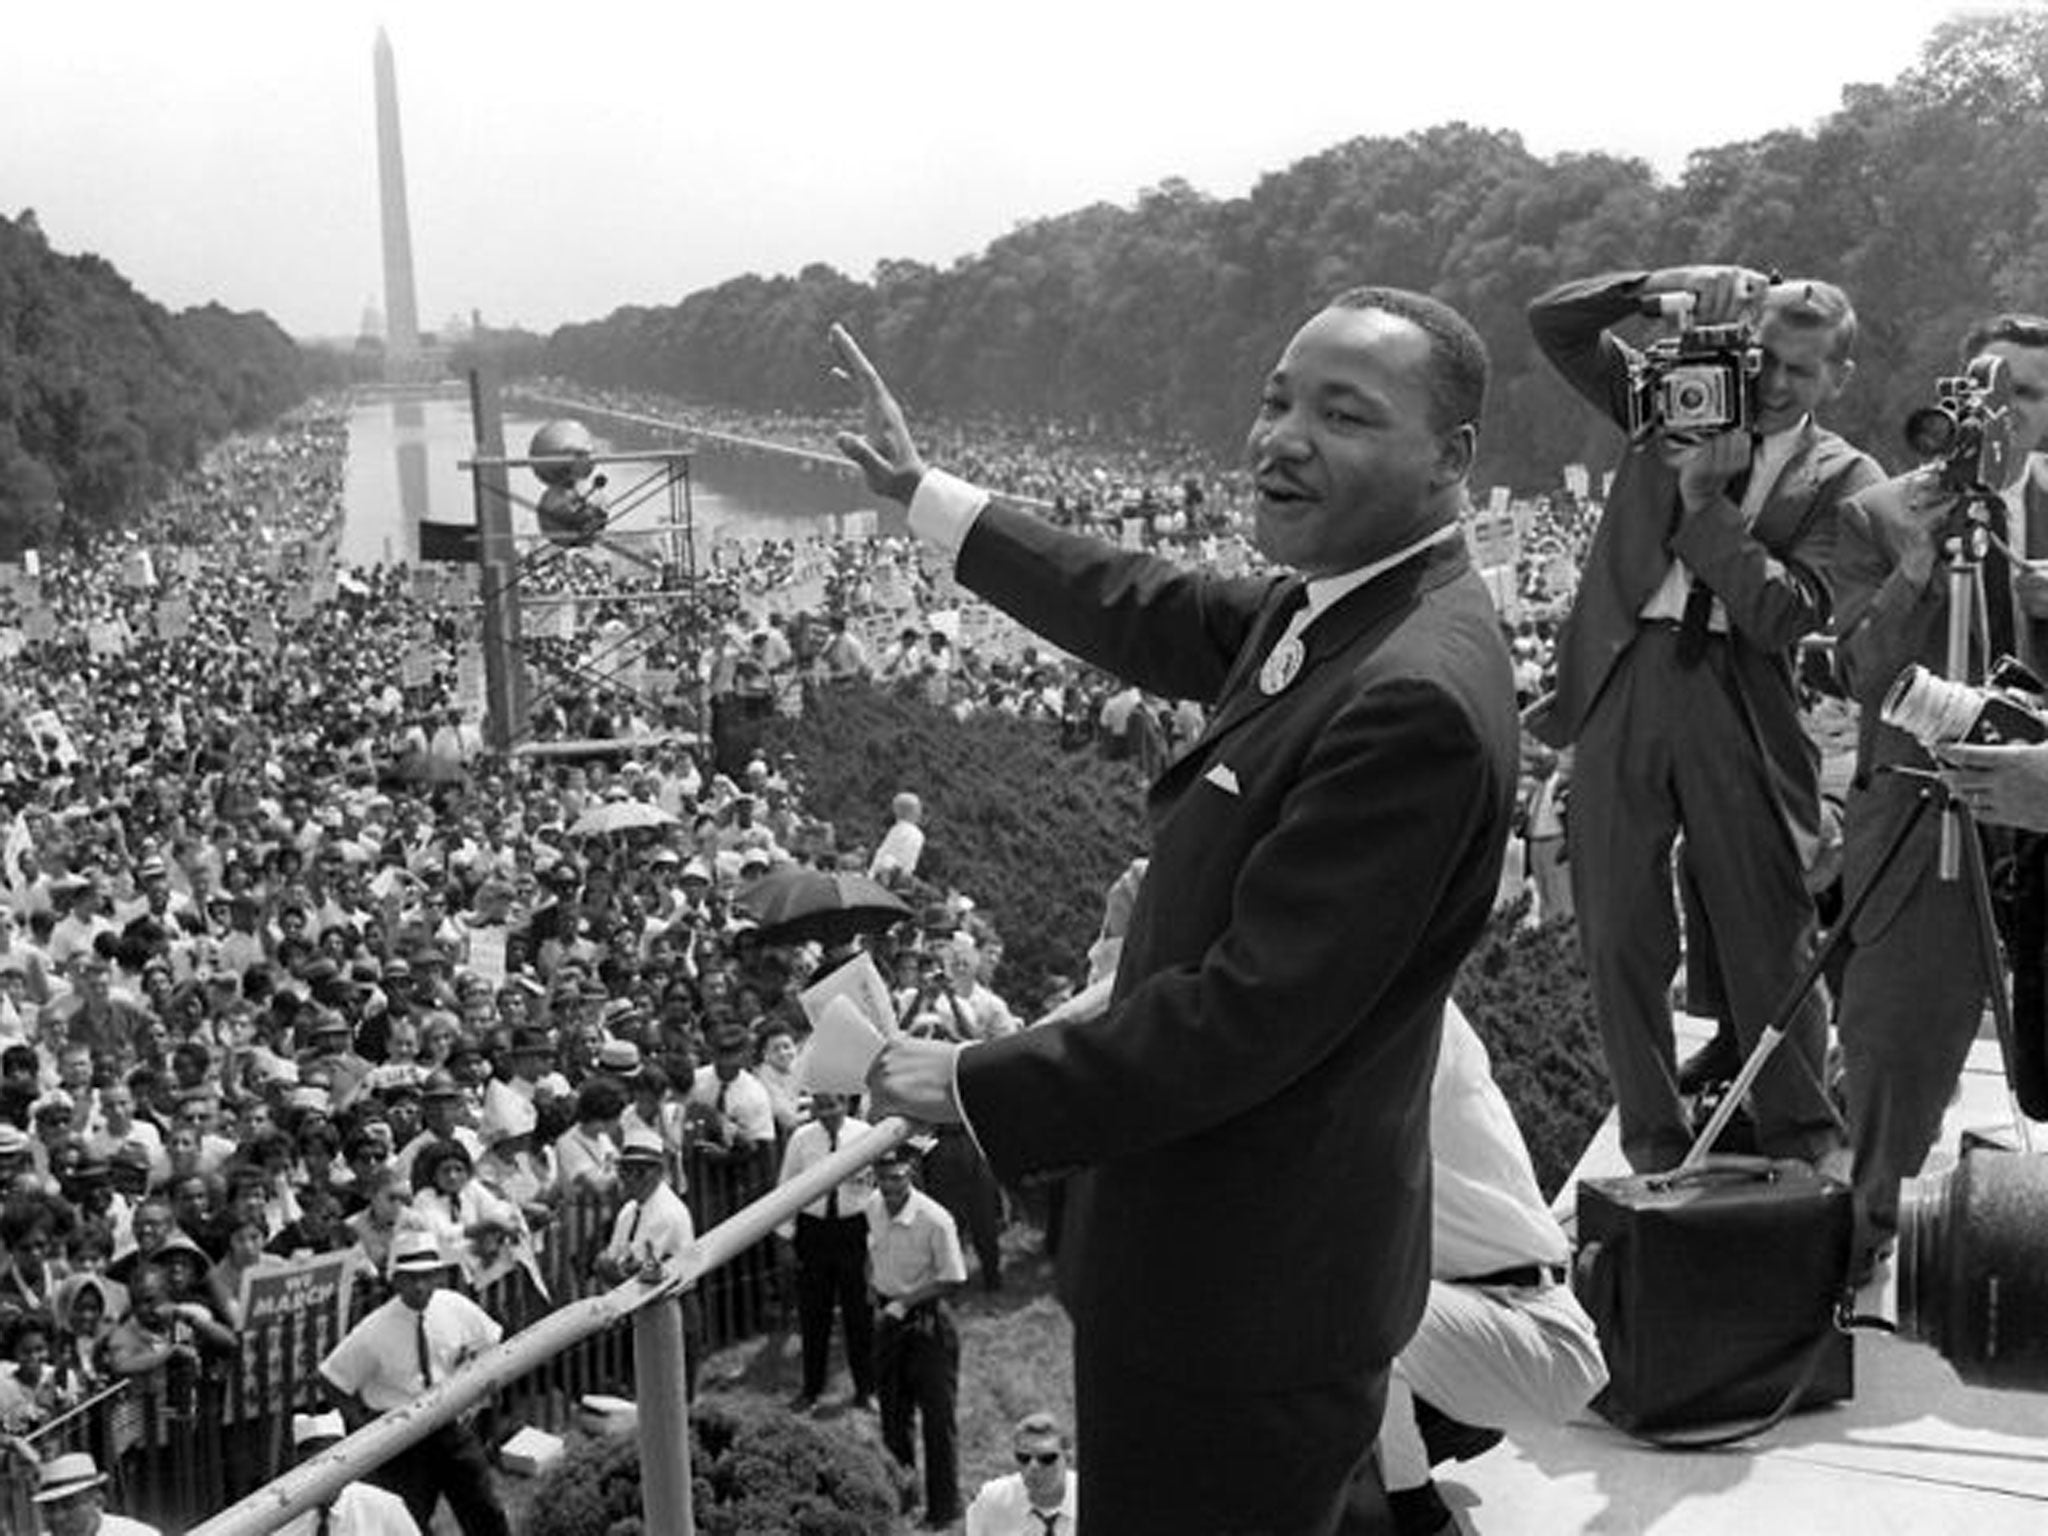 King's 'I Have a Dream' speech calls for an end to racism in America